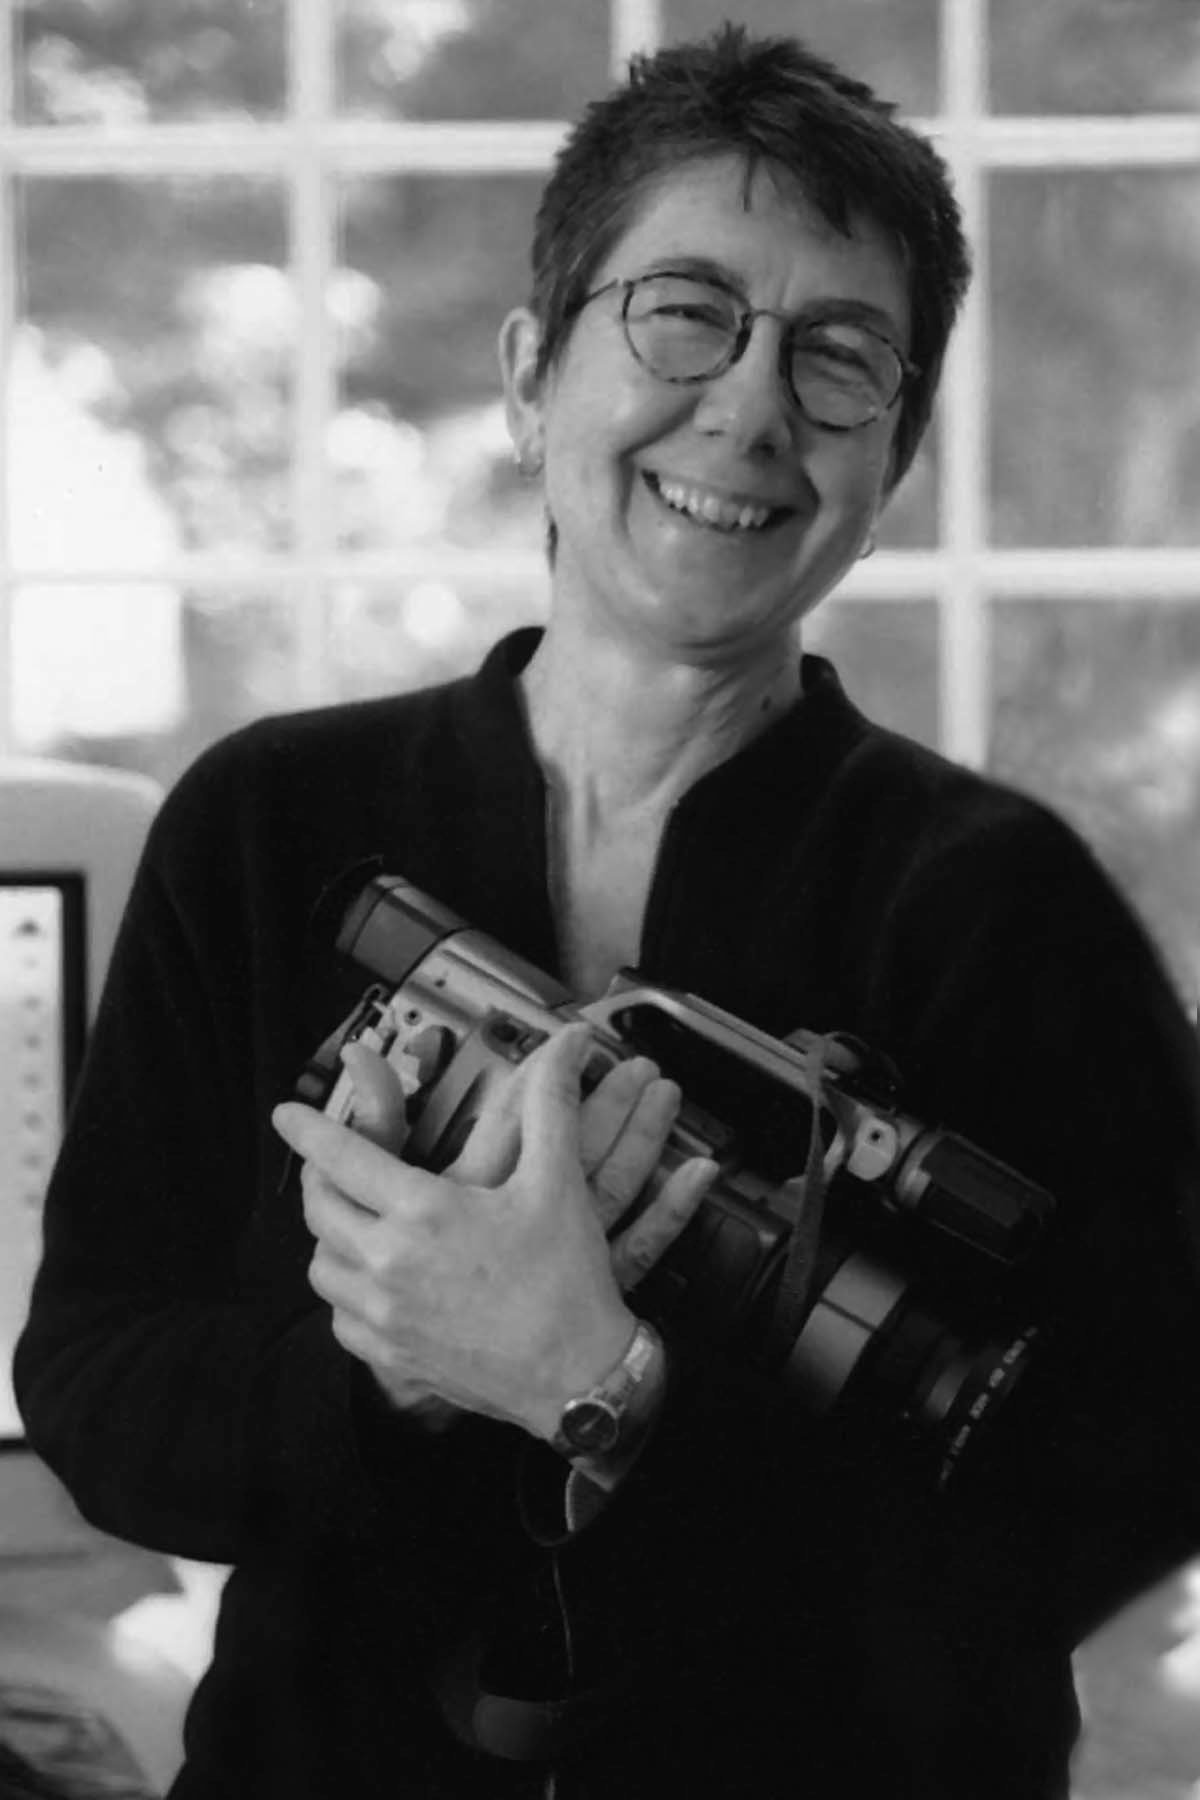 Julia Reichert wearing a dark blouse and holding a camera in her arms. She is smiling, has short hair and circled frames. Black and white portrait.